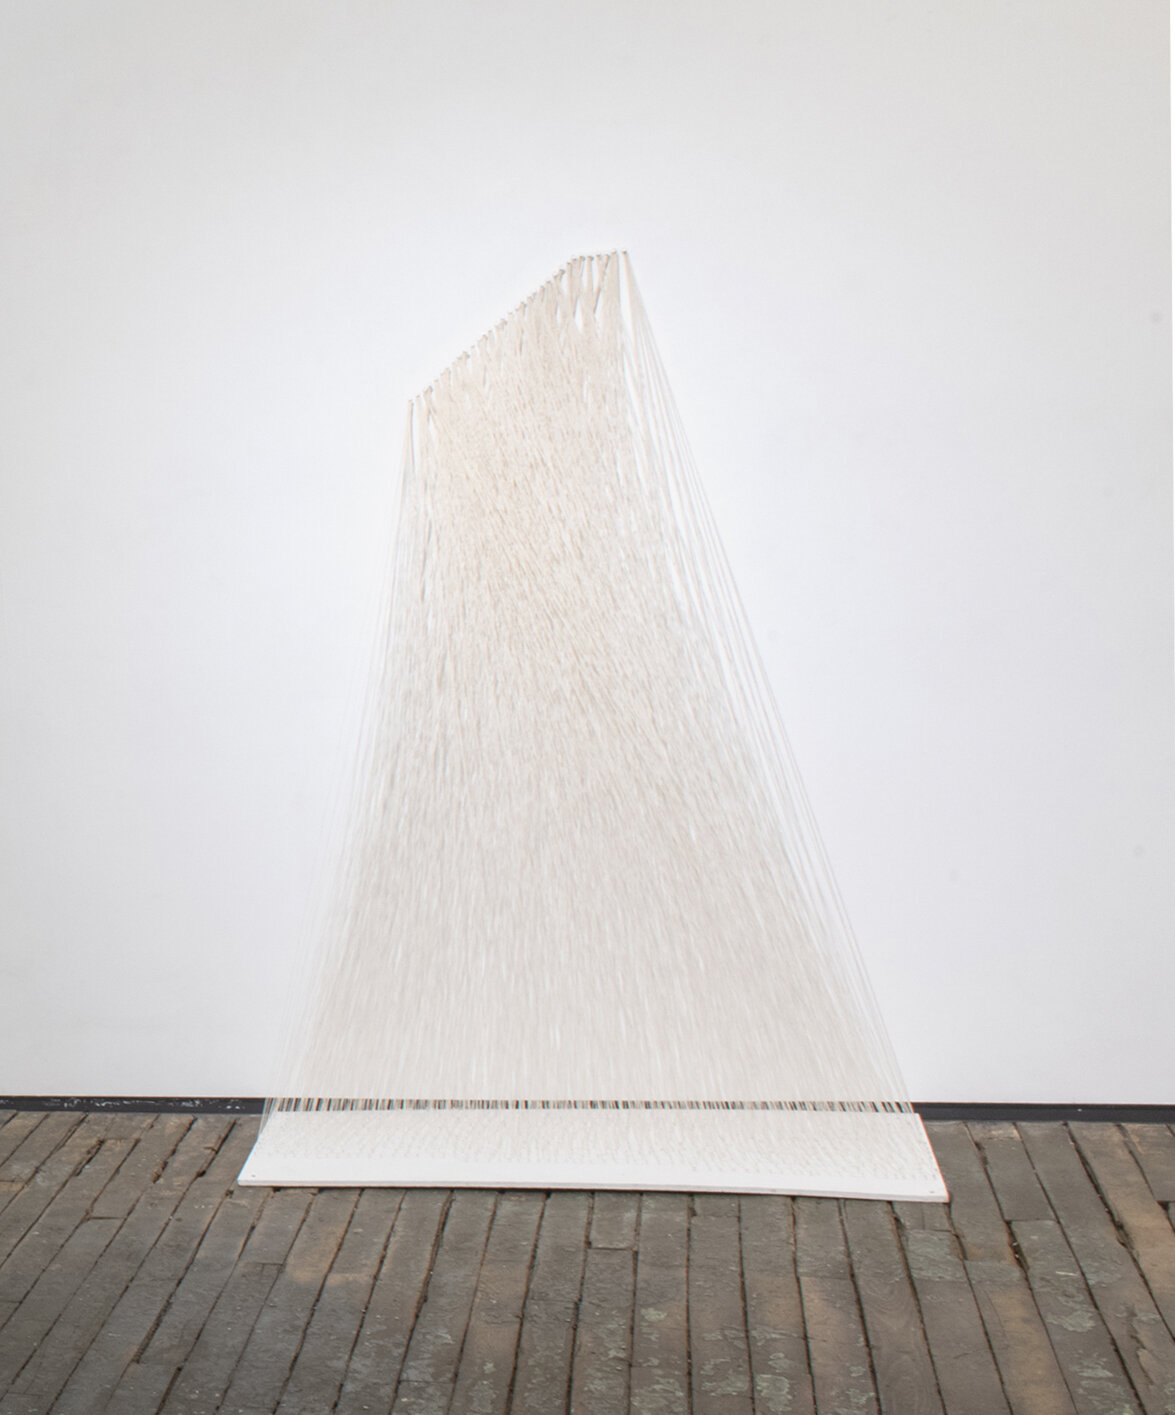   Male ,  1974 - 2021, Cotton string and nails, 72 x 48 x 24 in / 183 x 122 x 61 cm, Photo: Adam Reich 